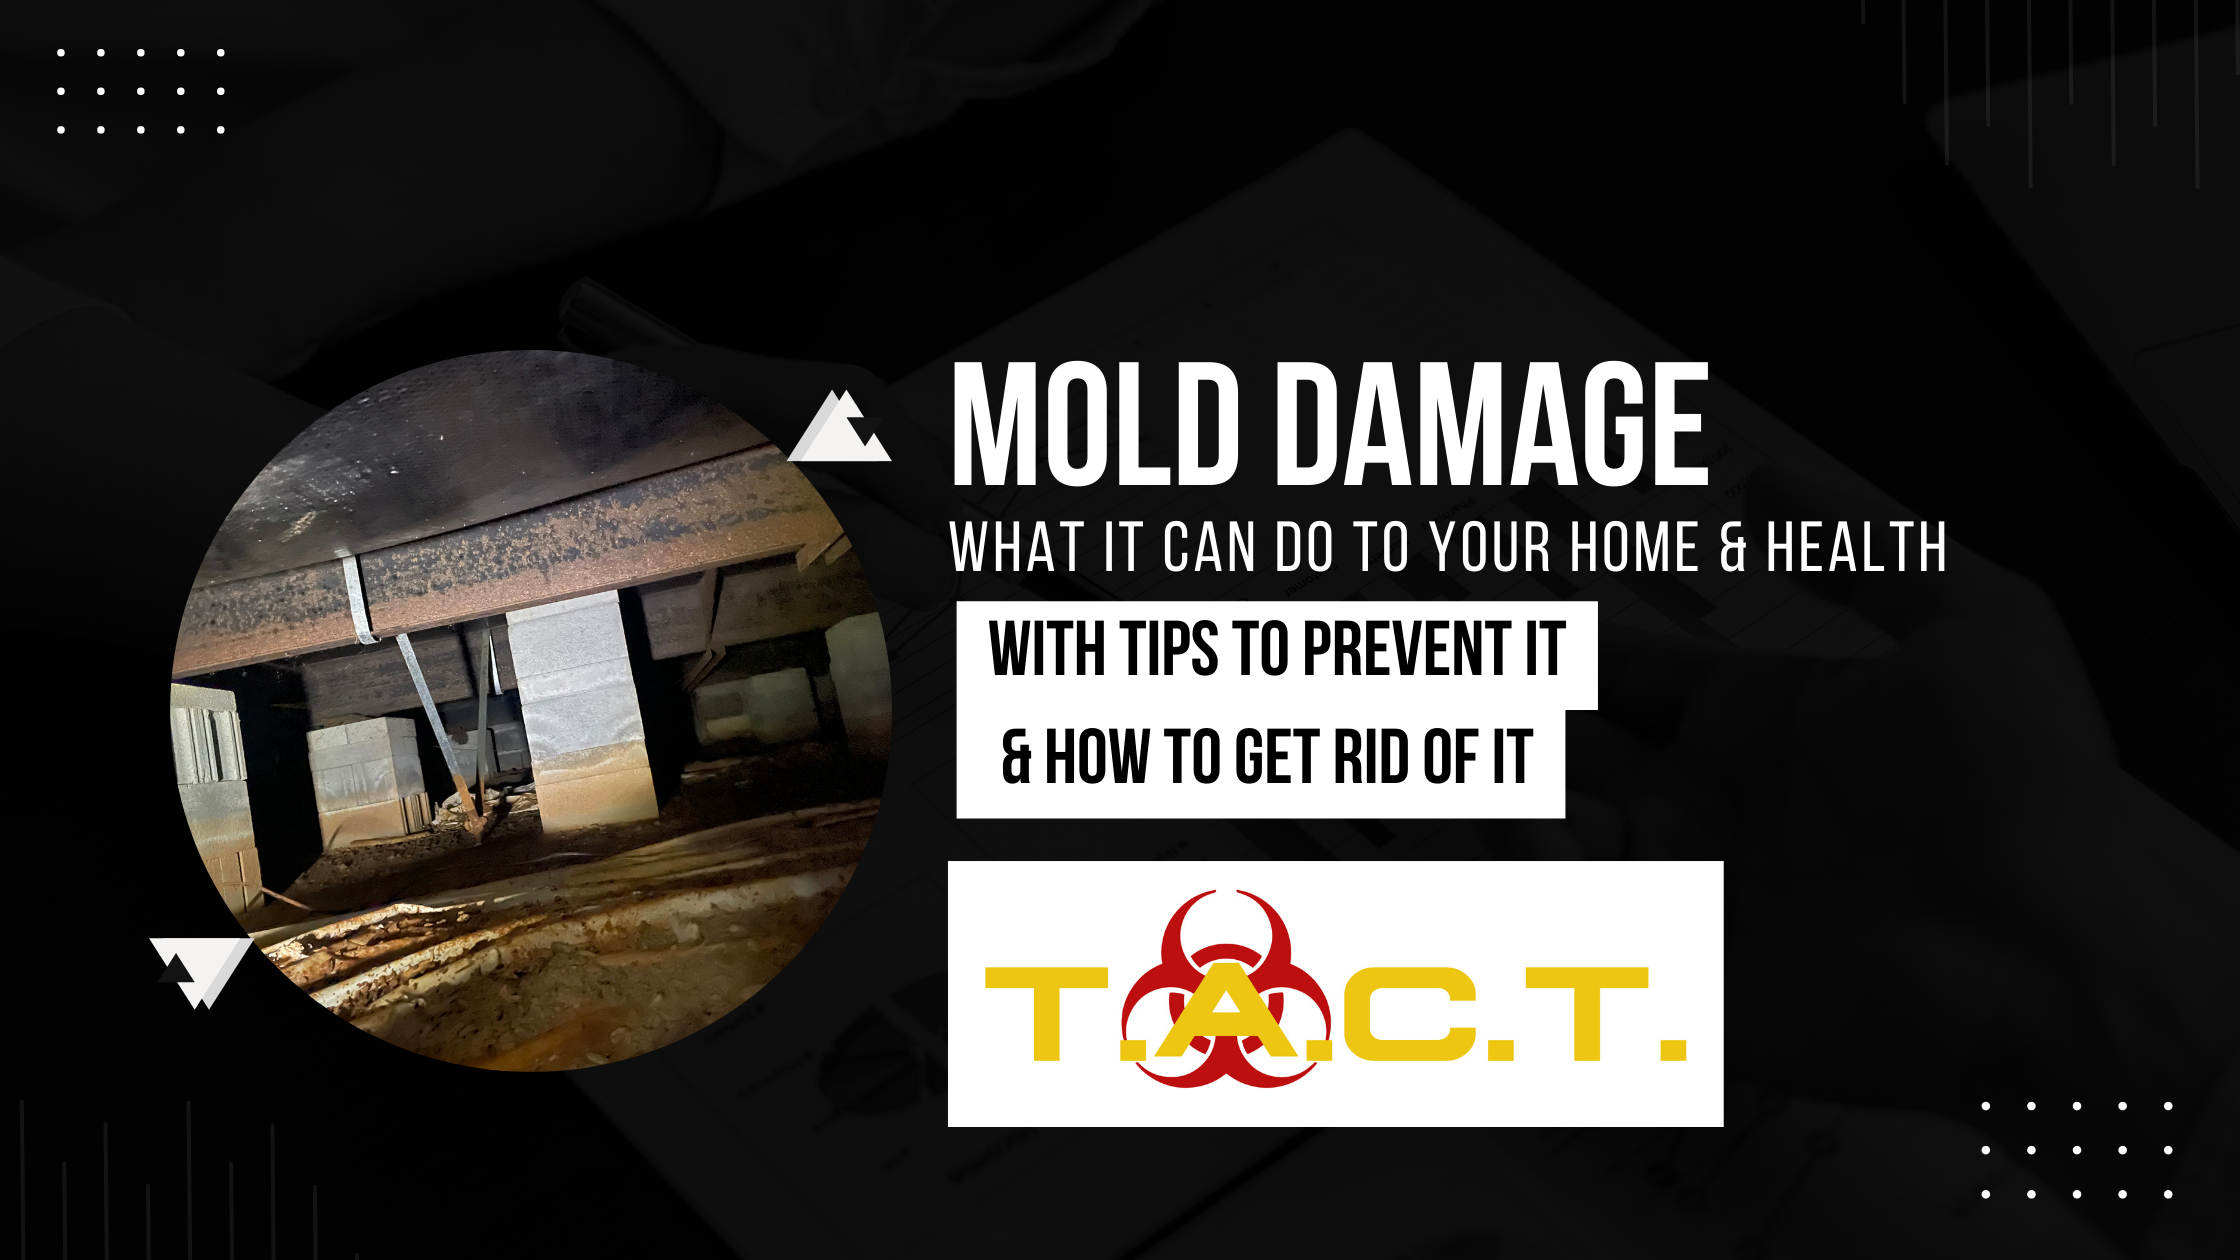 The Damage That Mold Can Cause Is Impressive